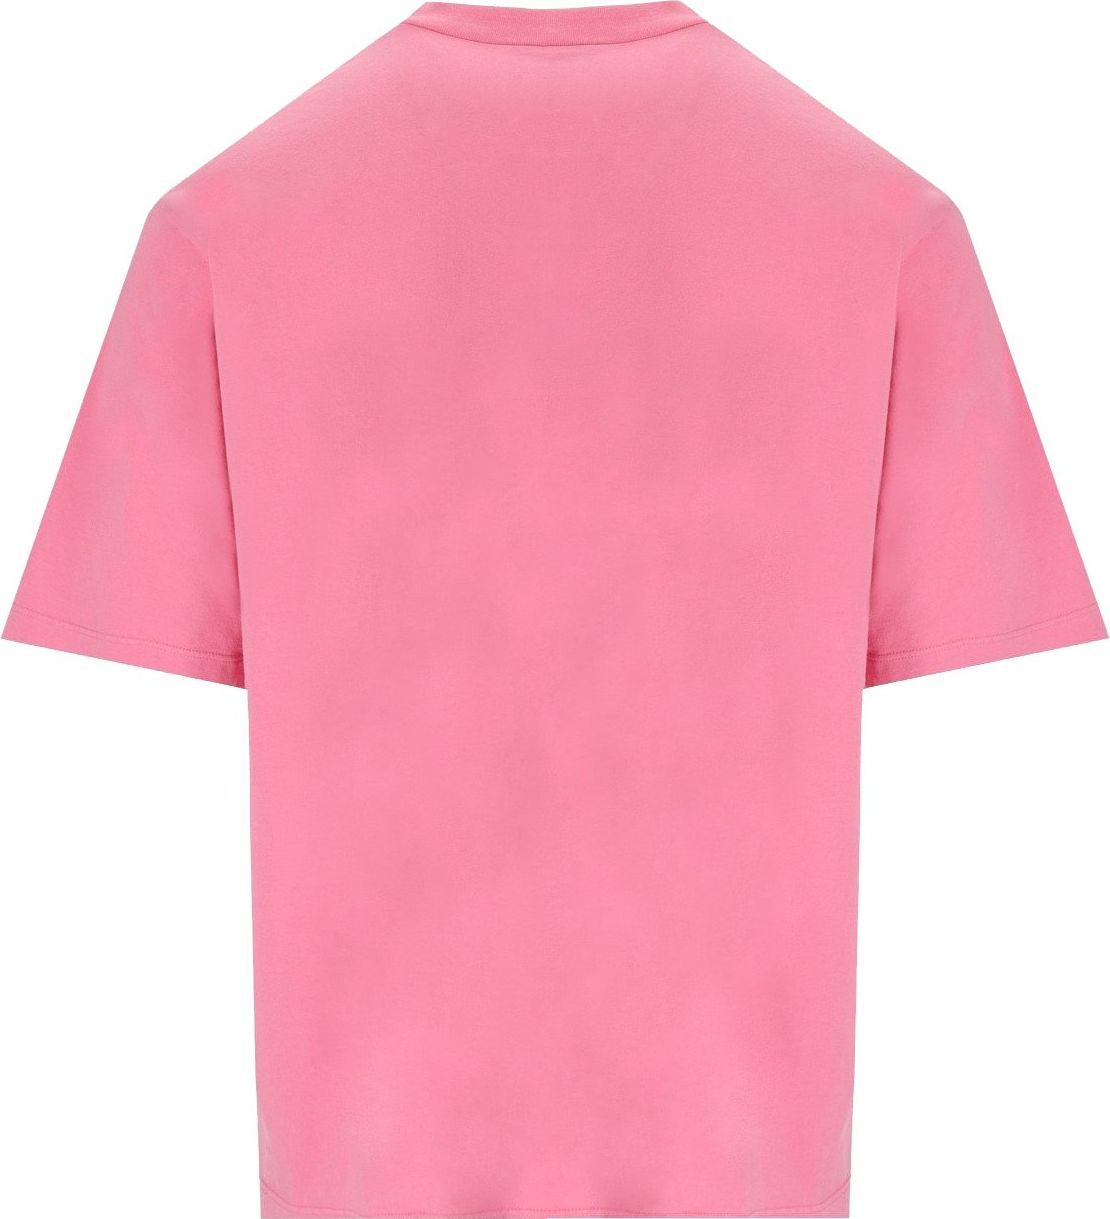 Dsquared2 Pink Loose Fit T-shirt Pink Roze